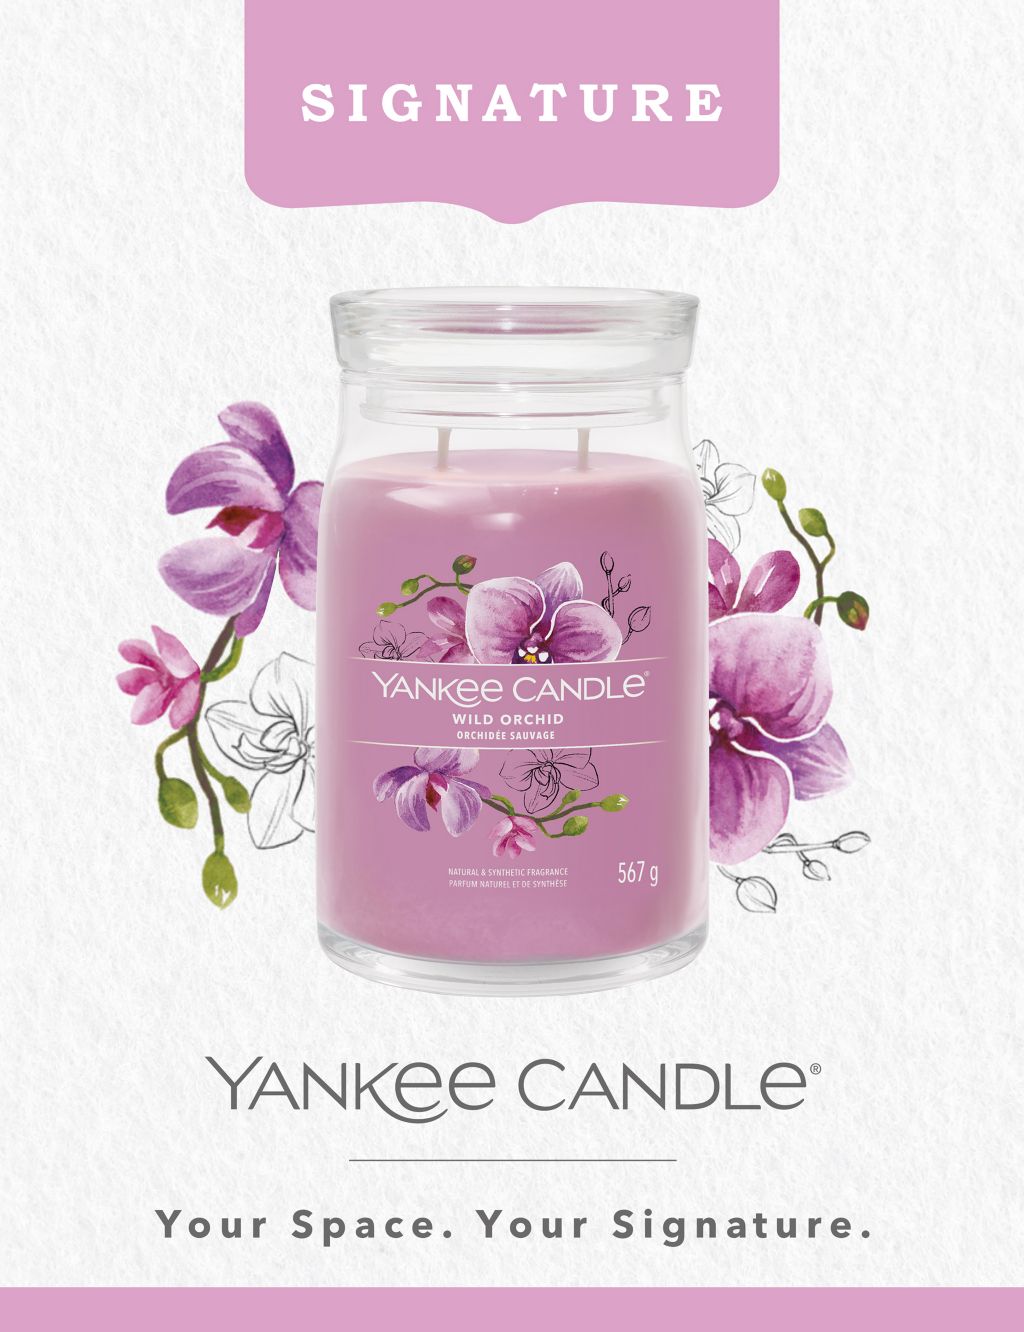 Wild Orchid Signature Large Jar Scented Candle image 3